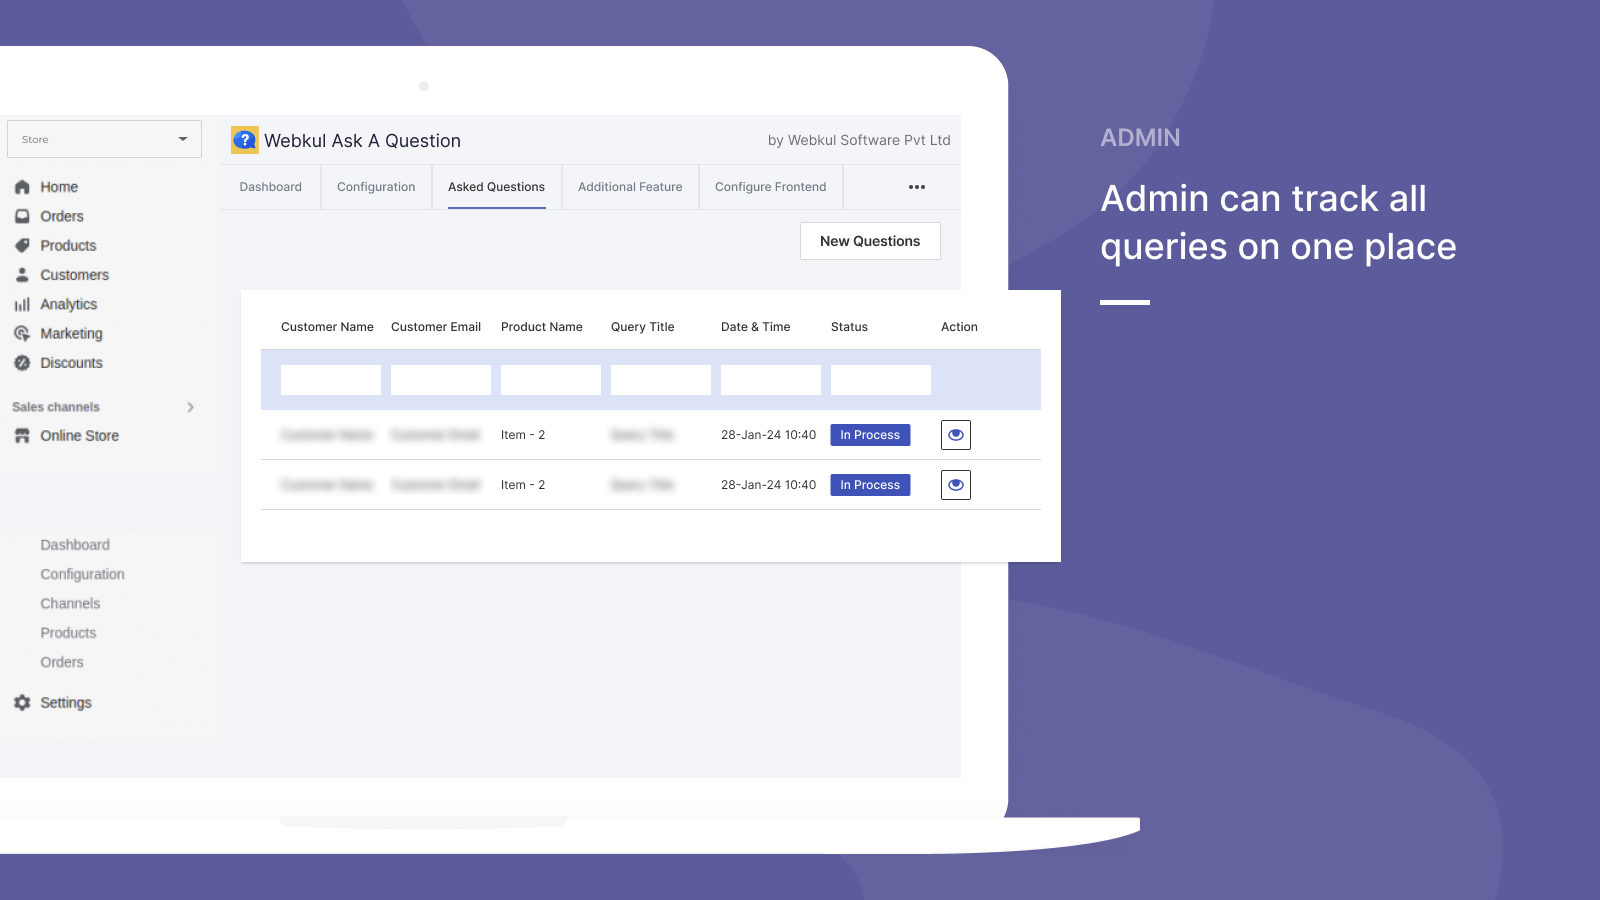 Admin can track all queries in one place